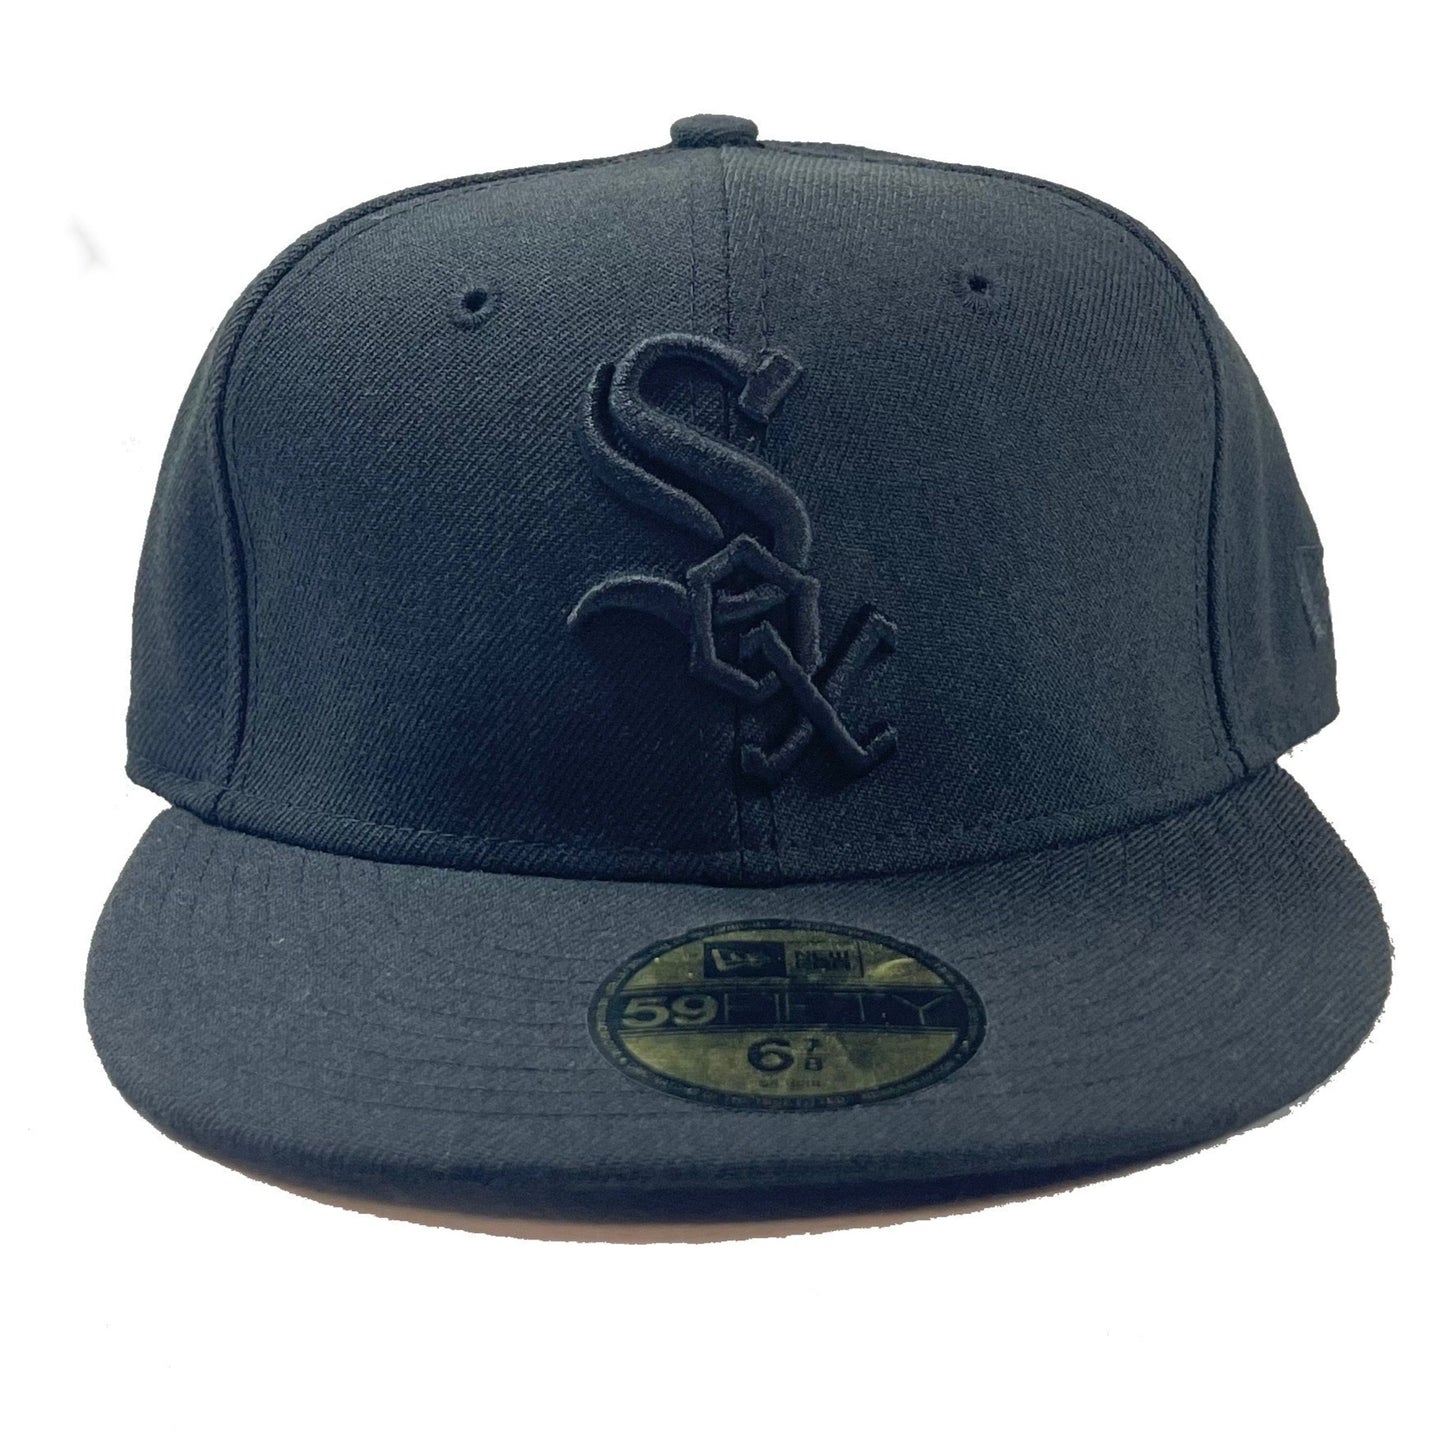 Chicago White Sox (Black) Fitted